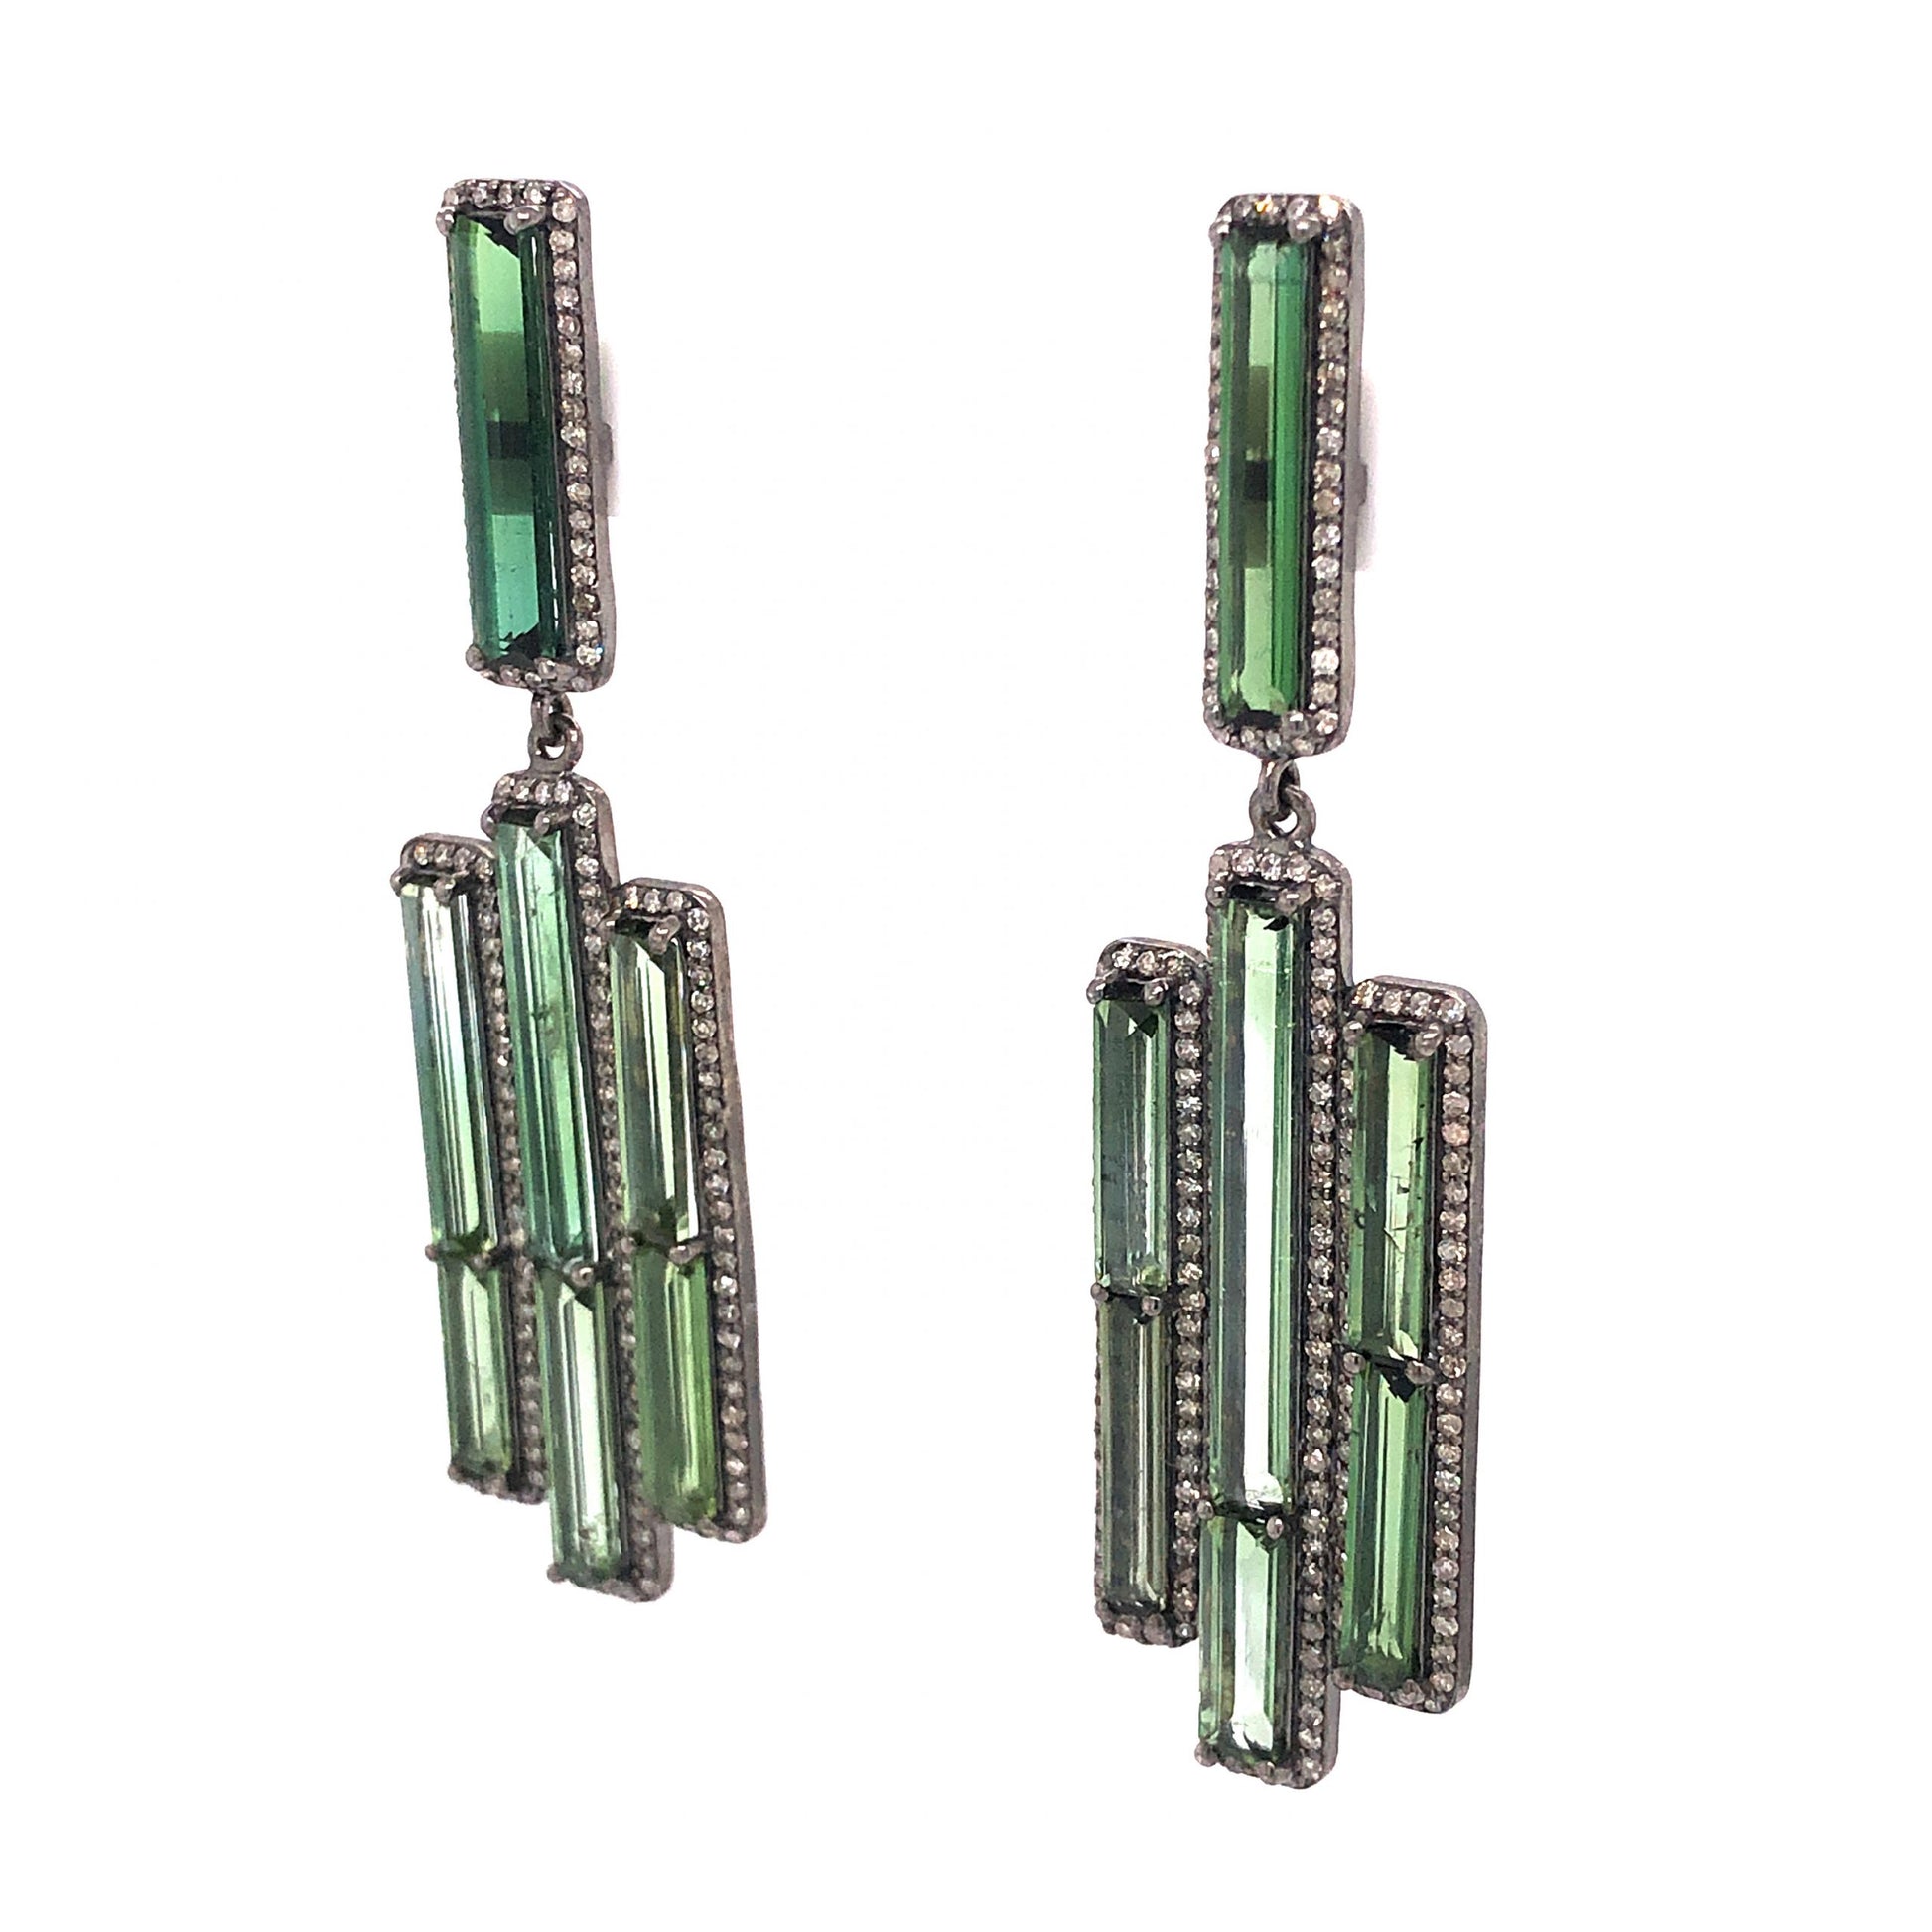 Green Tourmaline & Pave Diamond Drop Earrings in Sterling SilverComposition: Sterling Silver/14 Karat Yellow GoldTotal Diamond Weight: 1.38 ctTotal Gram Weight: 15.2 g